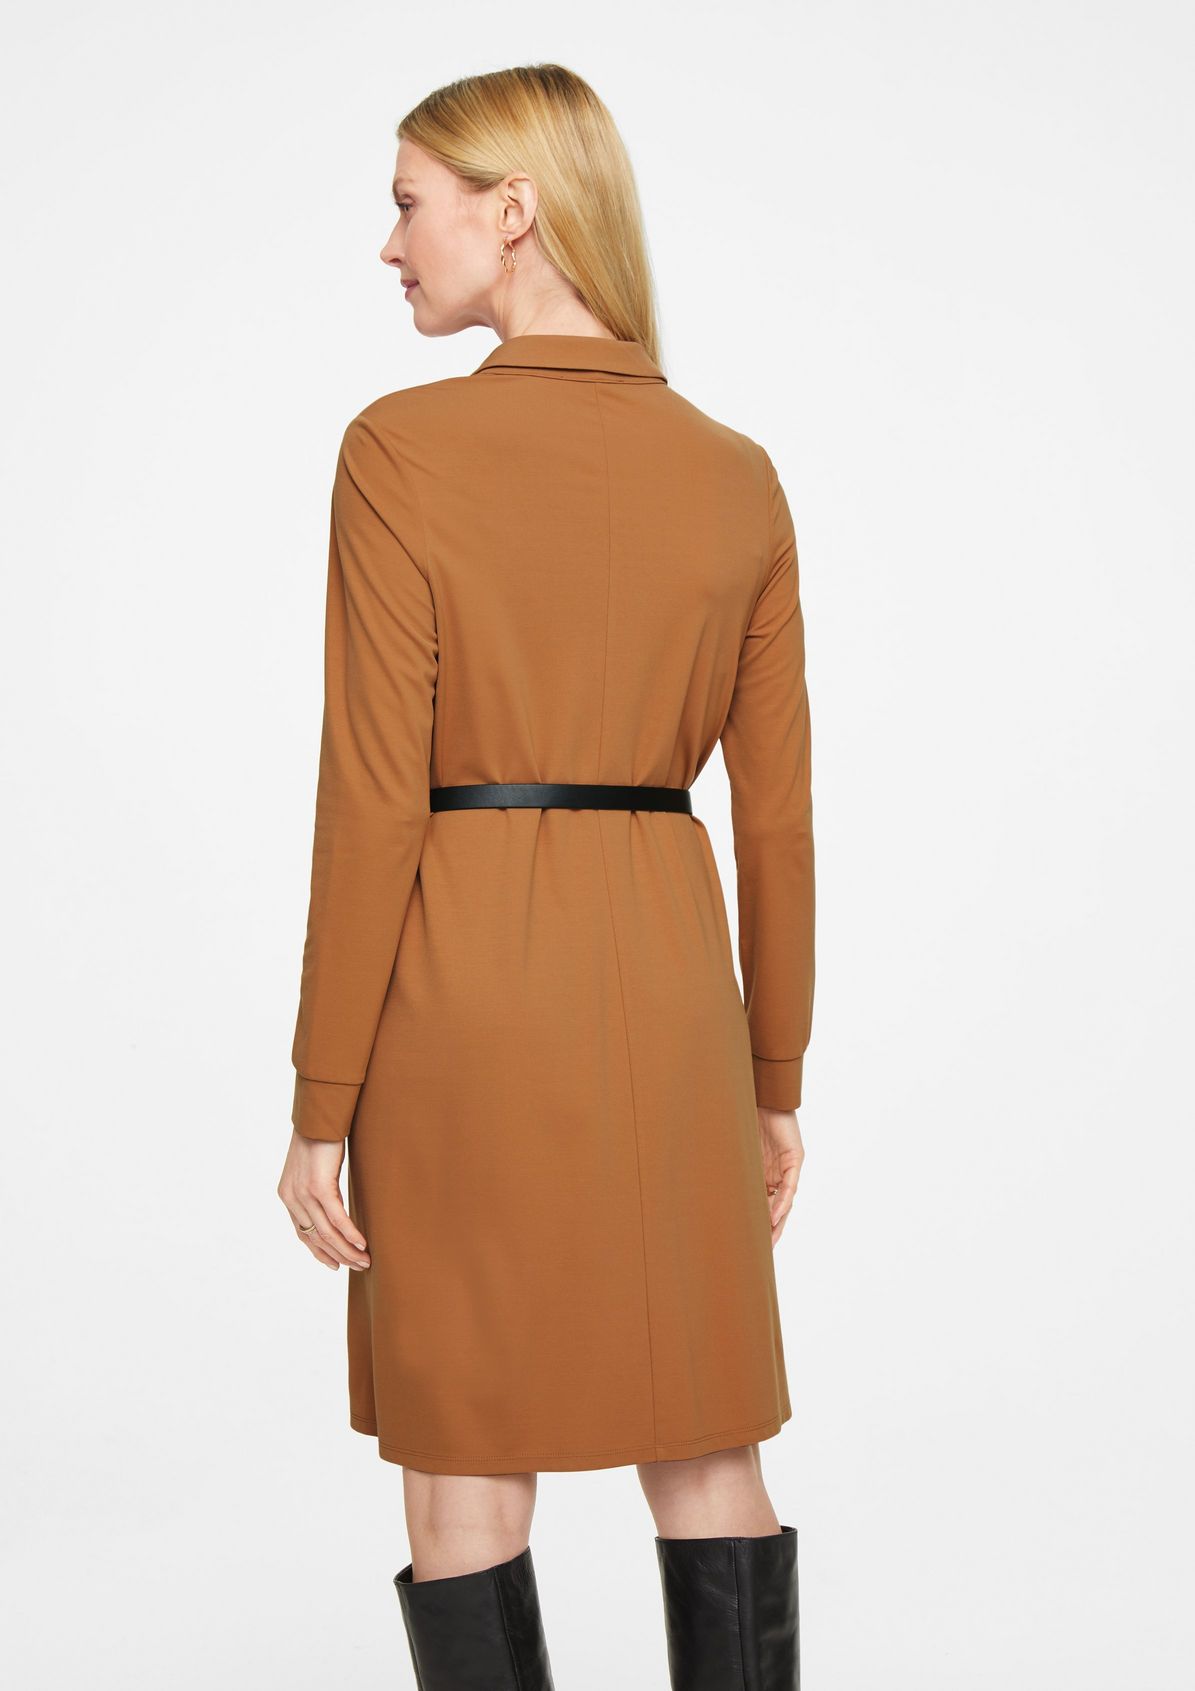 Ponte di Roma jersey dress from comma